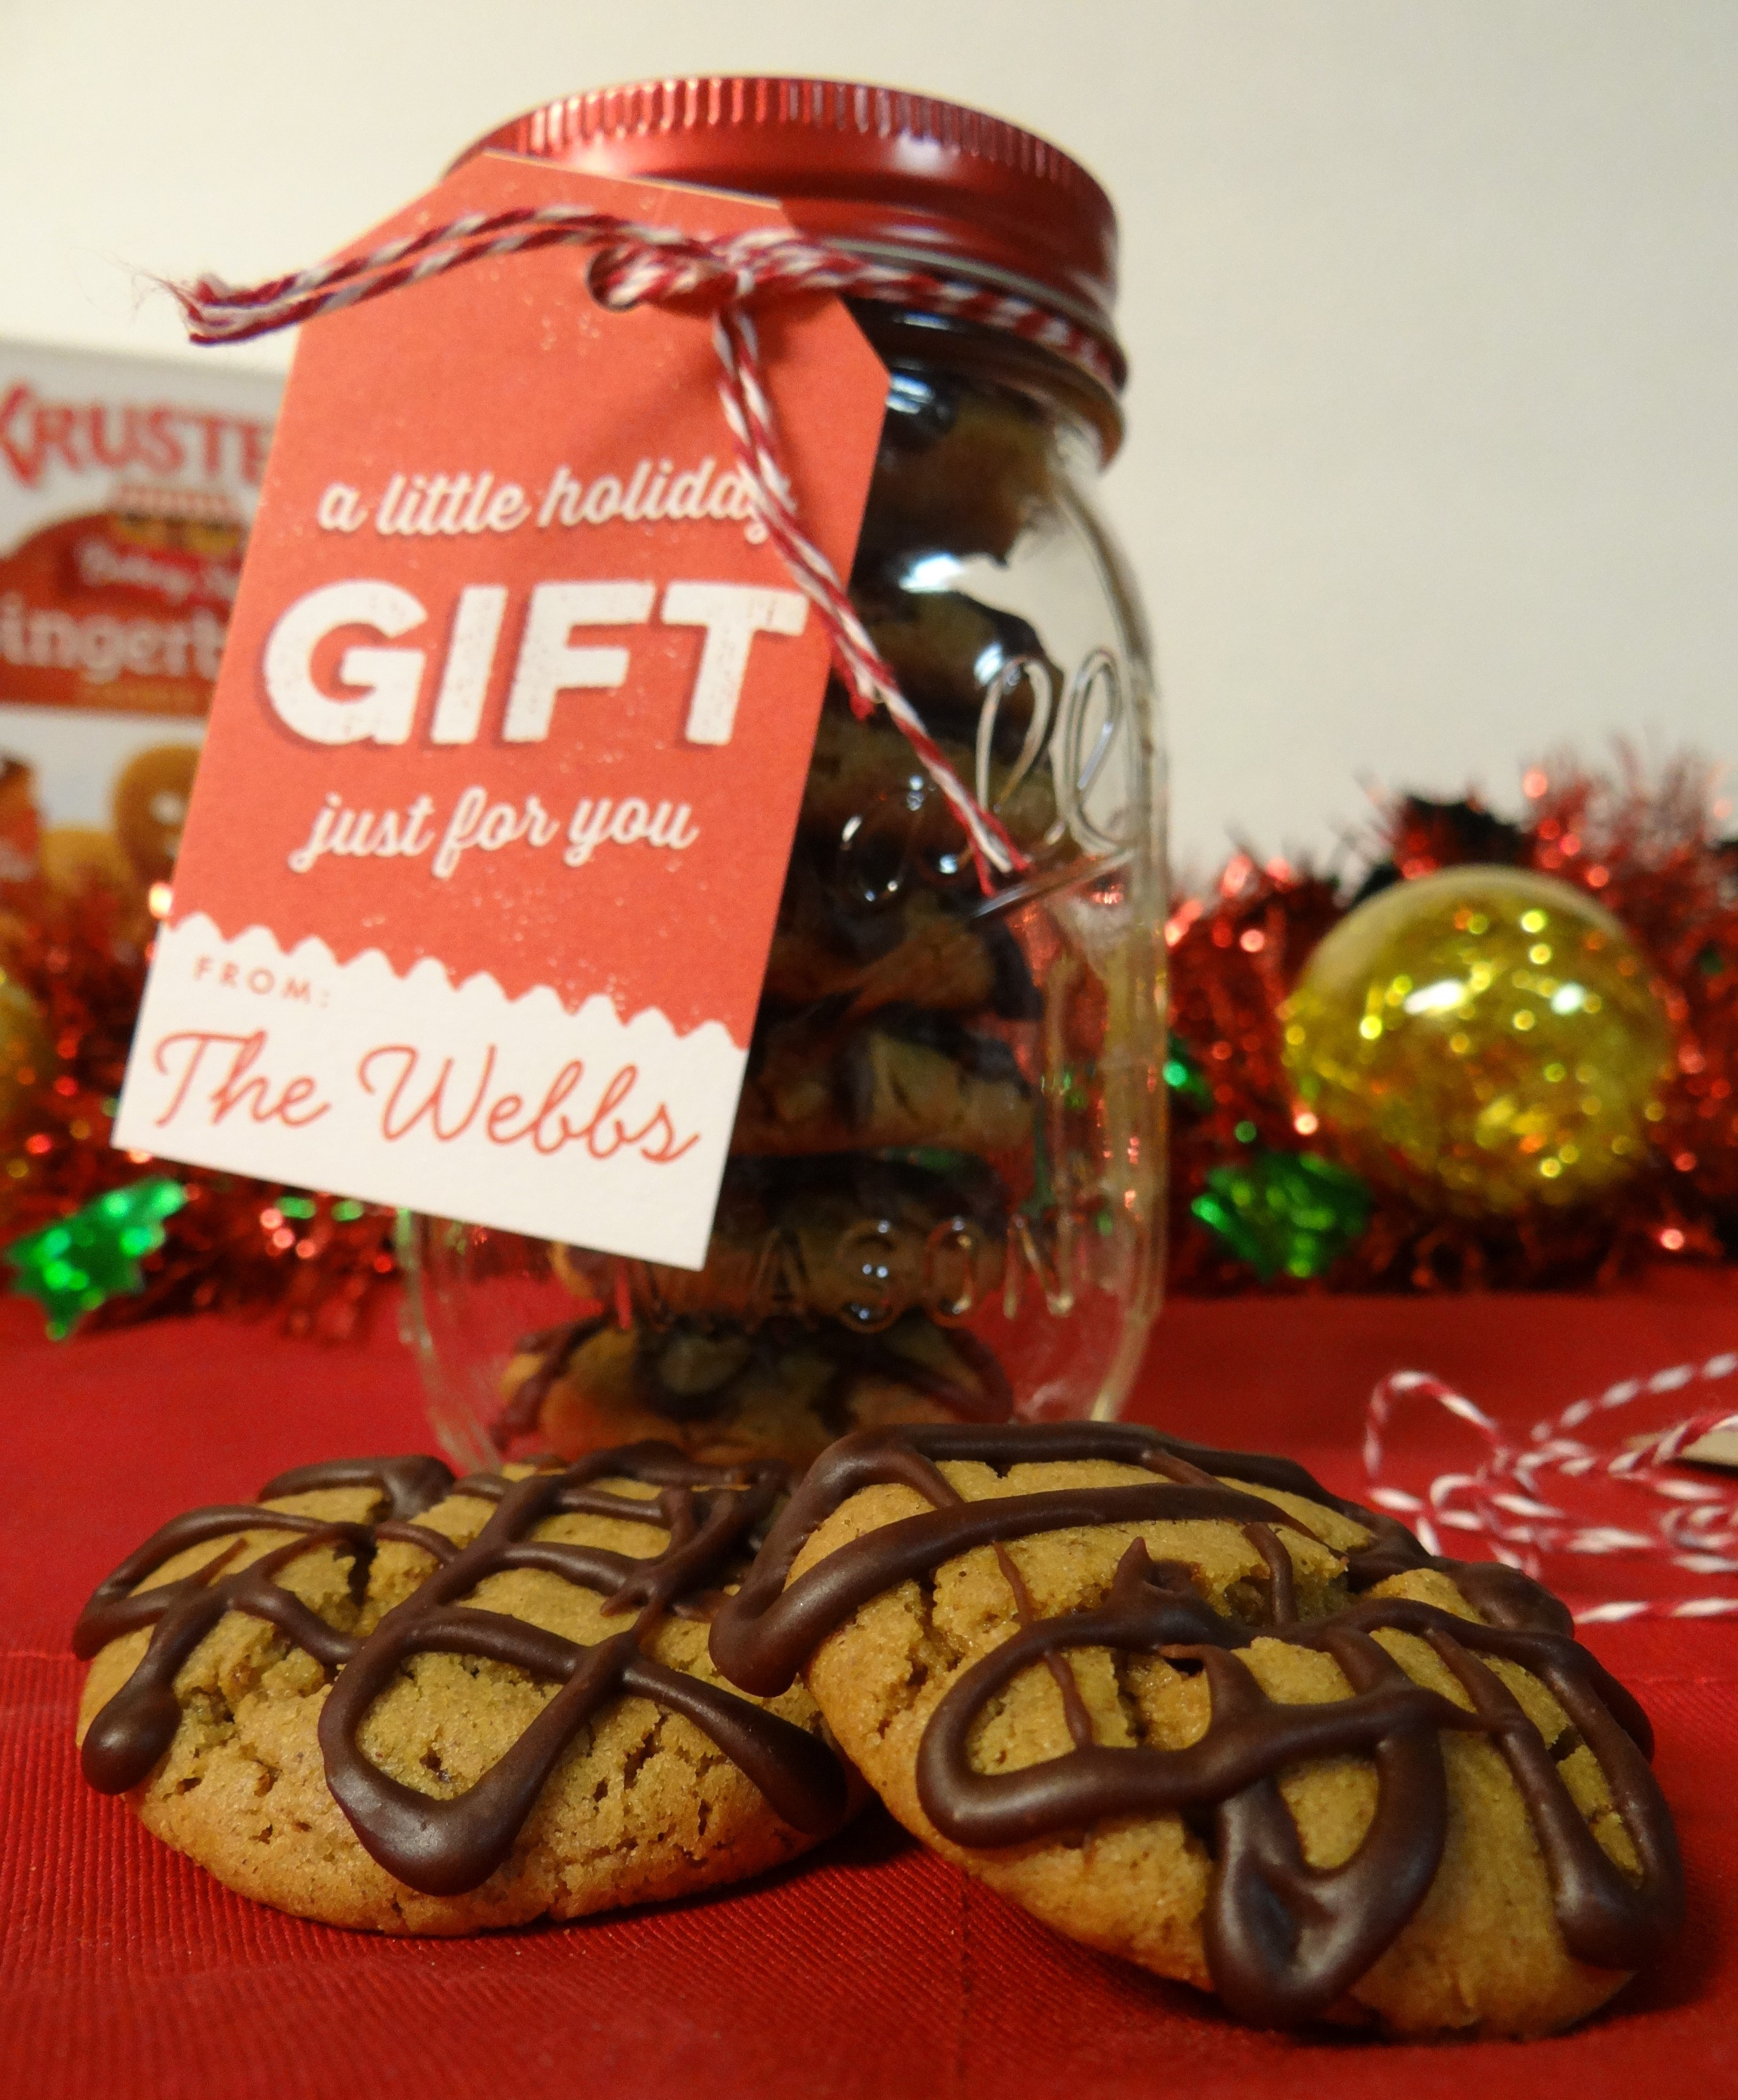 Christmas Cookie Gift Ideas
 Quick and Easy Christmas Cookie Gift Ideas mykrusteaz